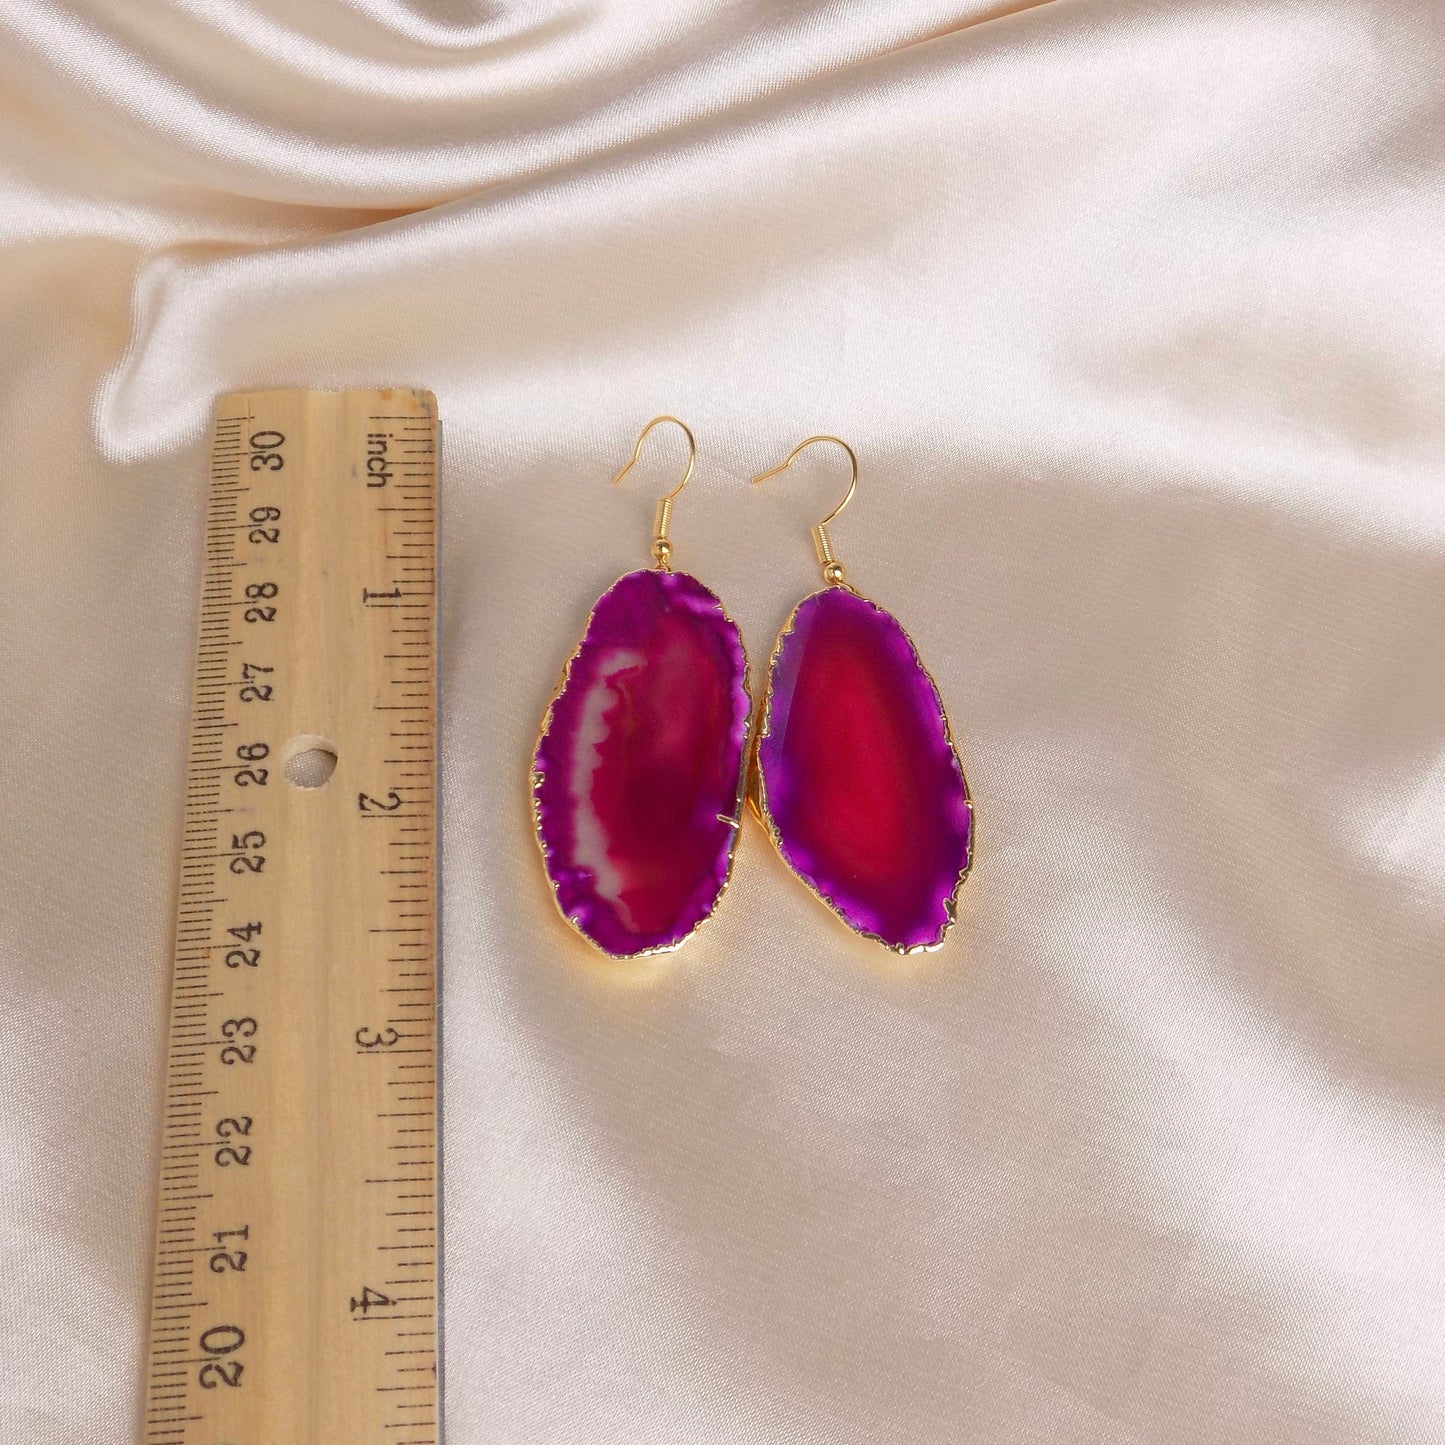 Statement Earrings, Slice Agate Earrings, Pink Agate Earrings, Geode Earrings, Large Gemstone Earrings Dangle, Gifts For Her, G15-117